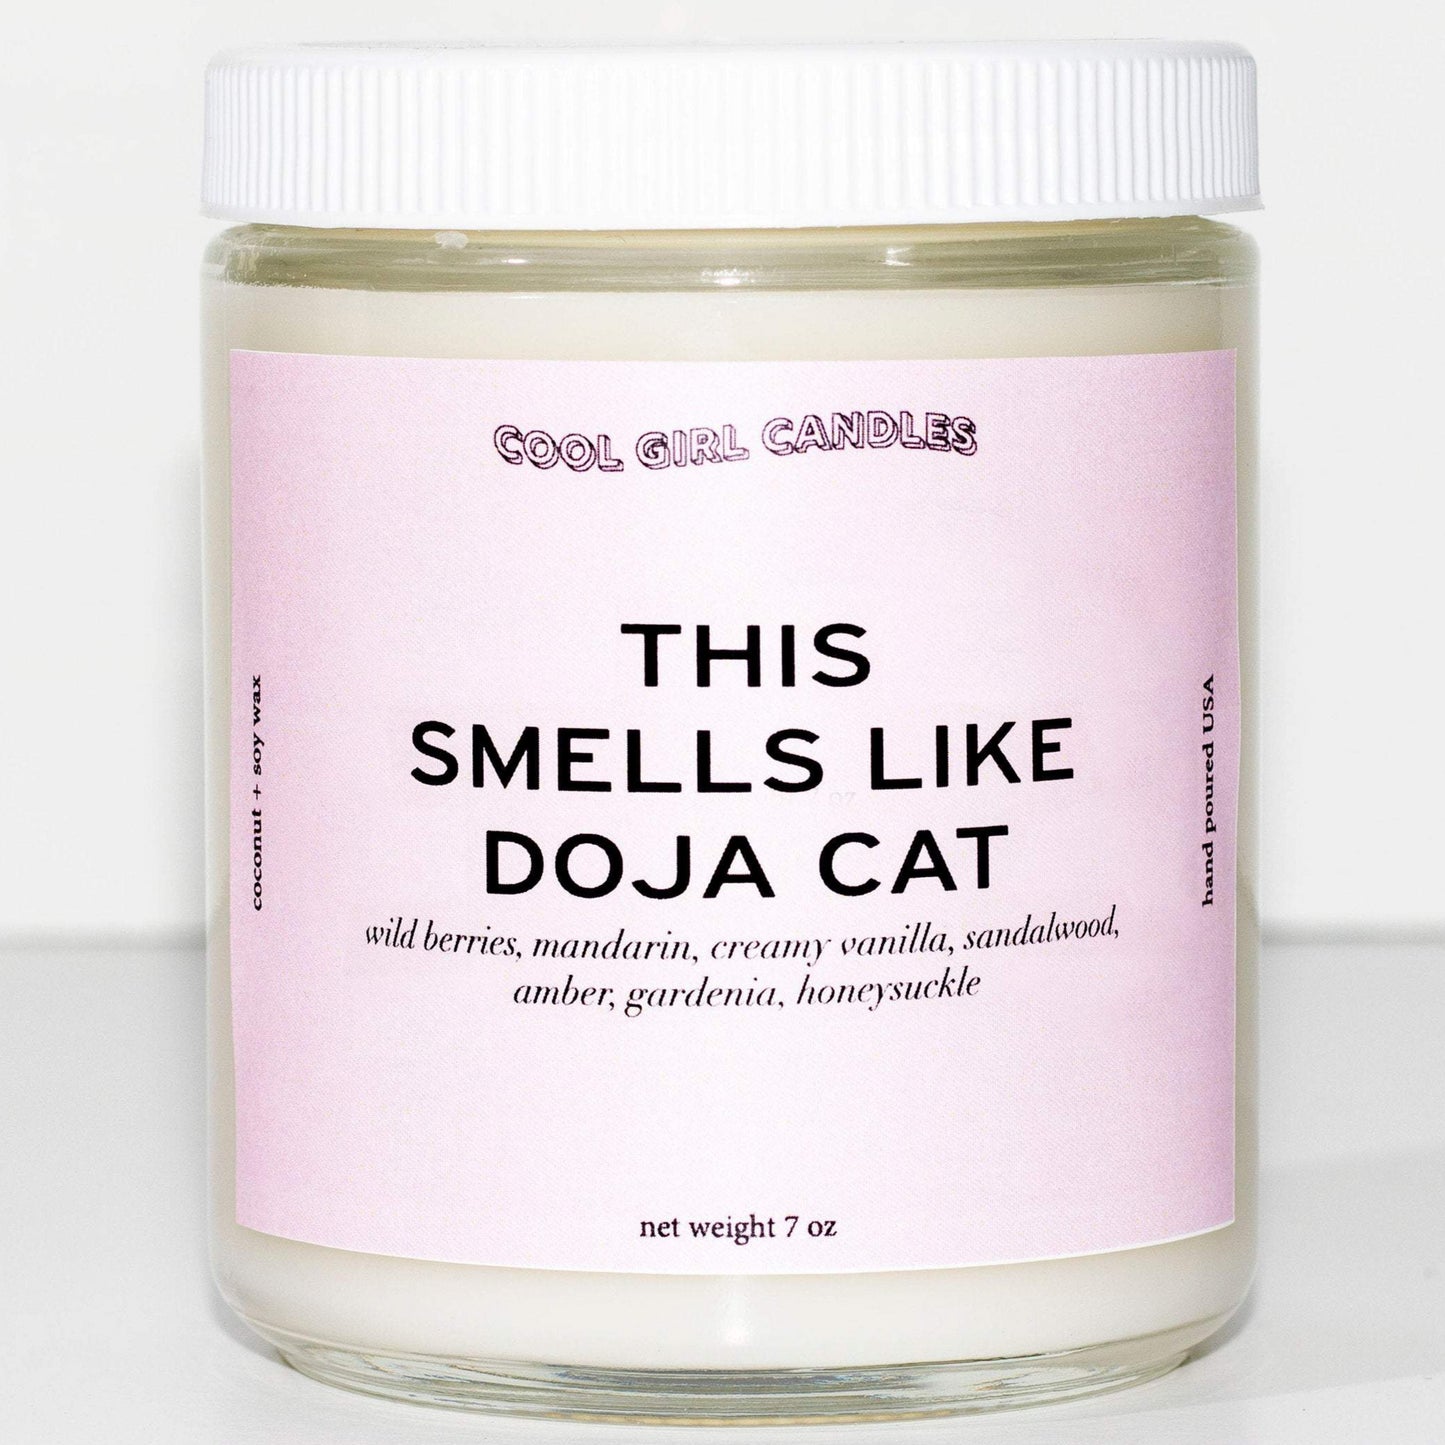 This candle smells like Doja Cat Scented Candle